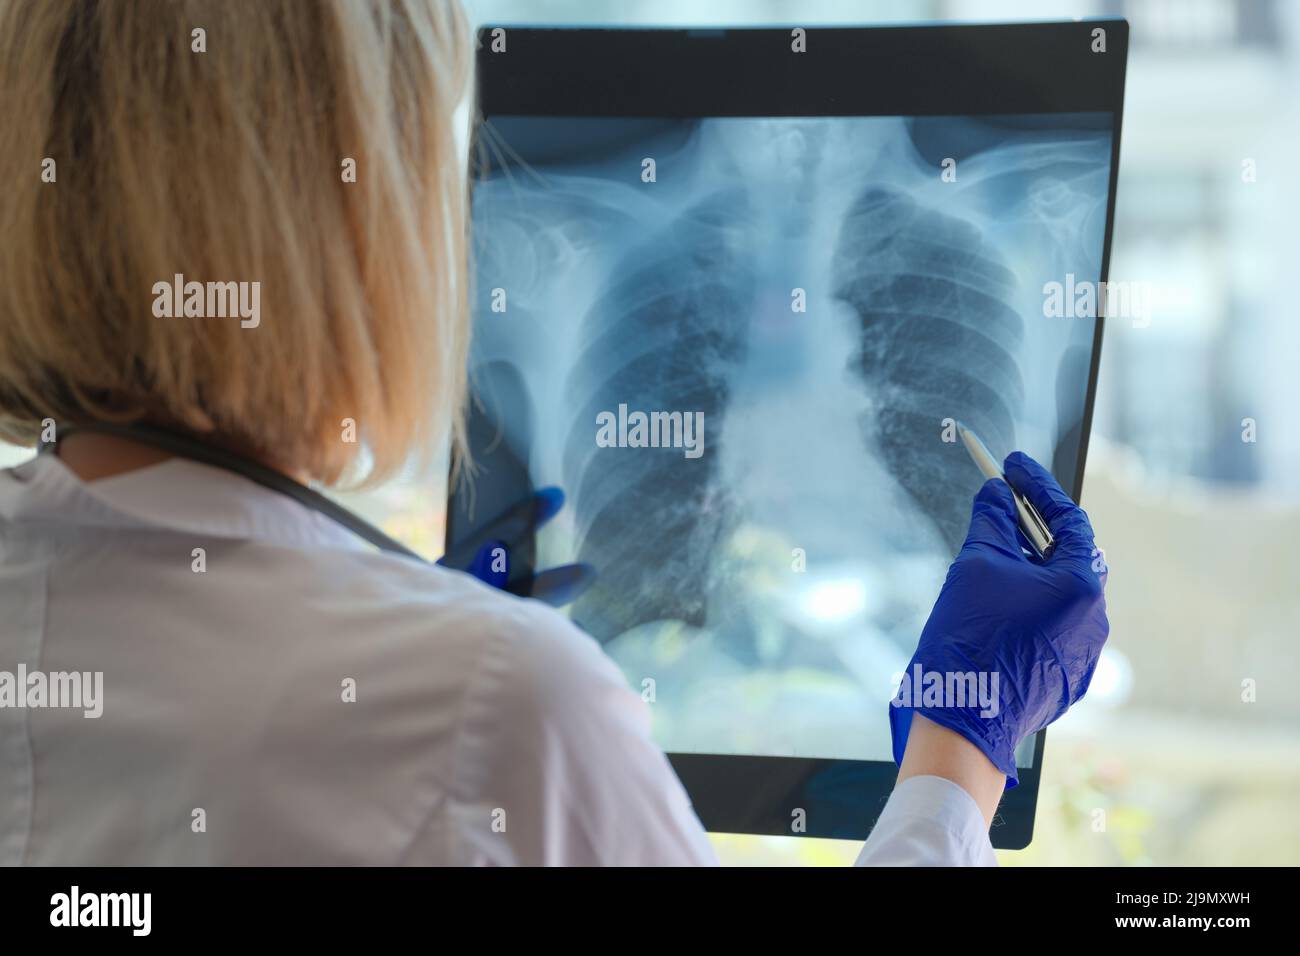 Medical assistant or radiologist holds pointer for examination and training on chest Stock Photo